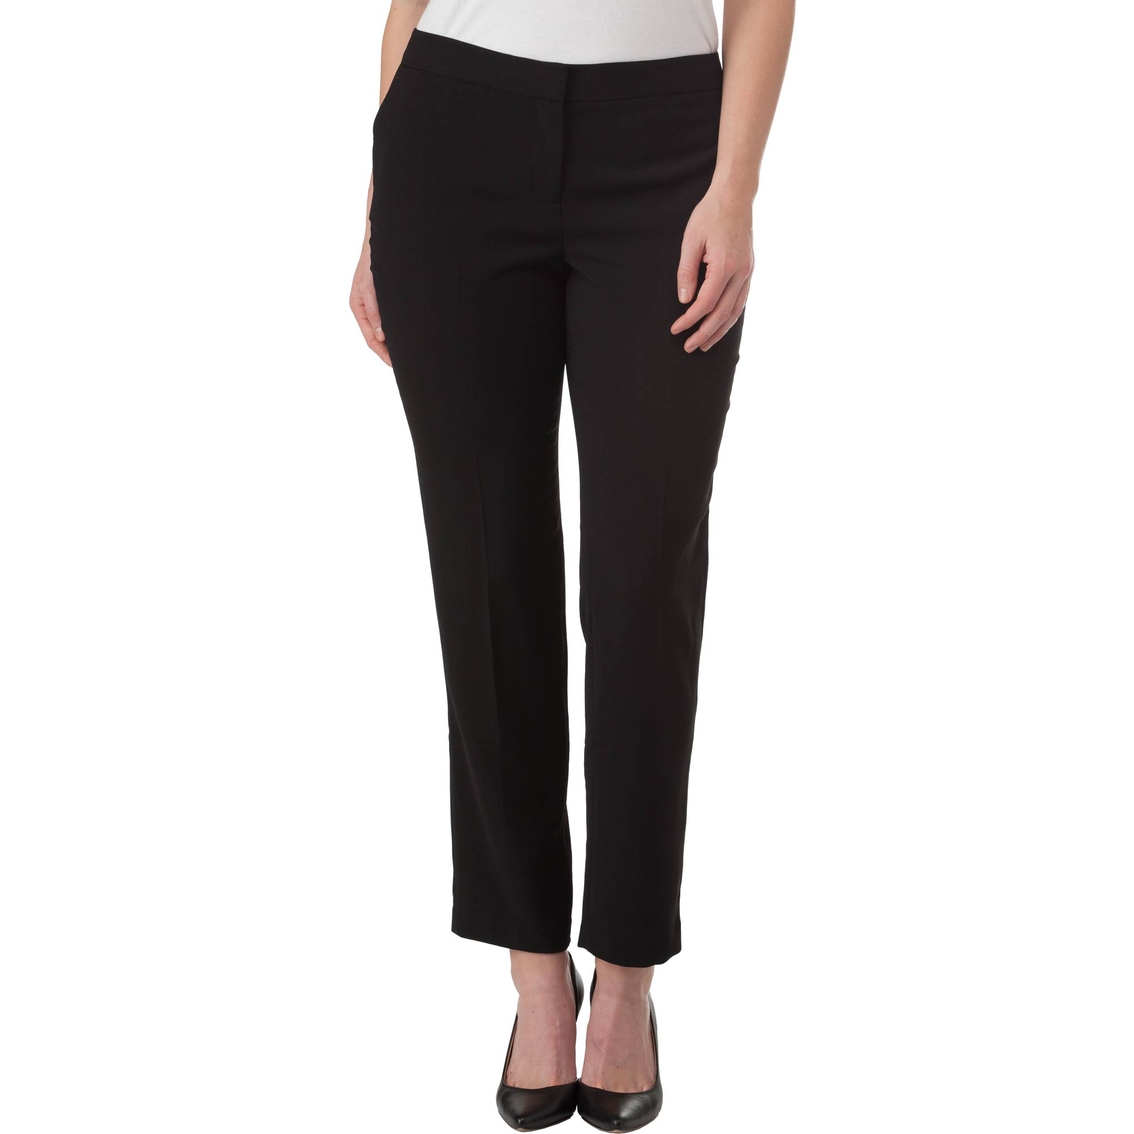 $89 NEW Women's Vince Camuto Soft Skinny Ankle Pants Rich Black CHOOSE ...